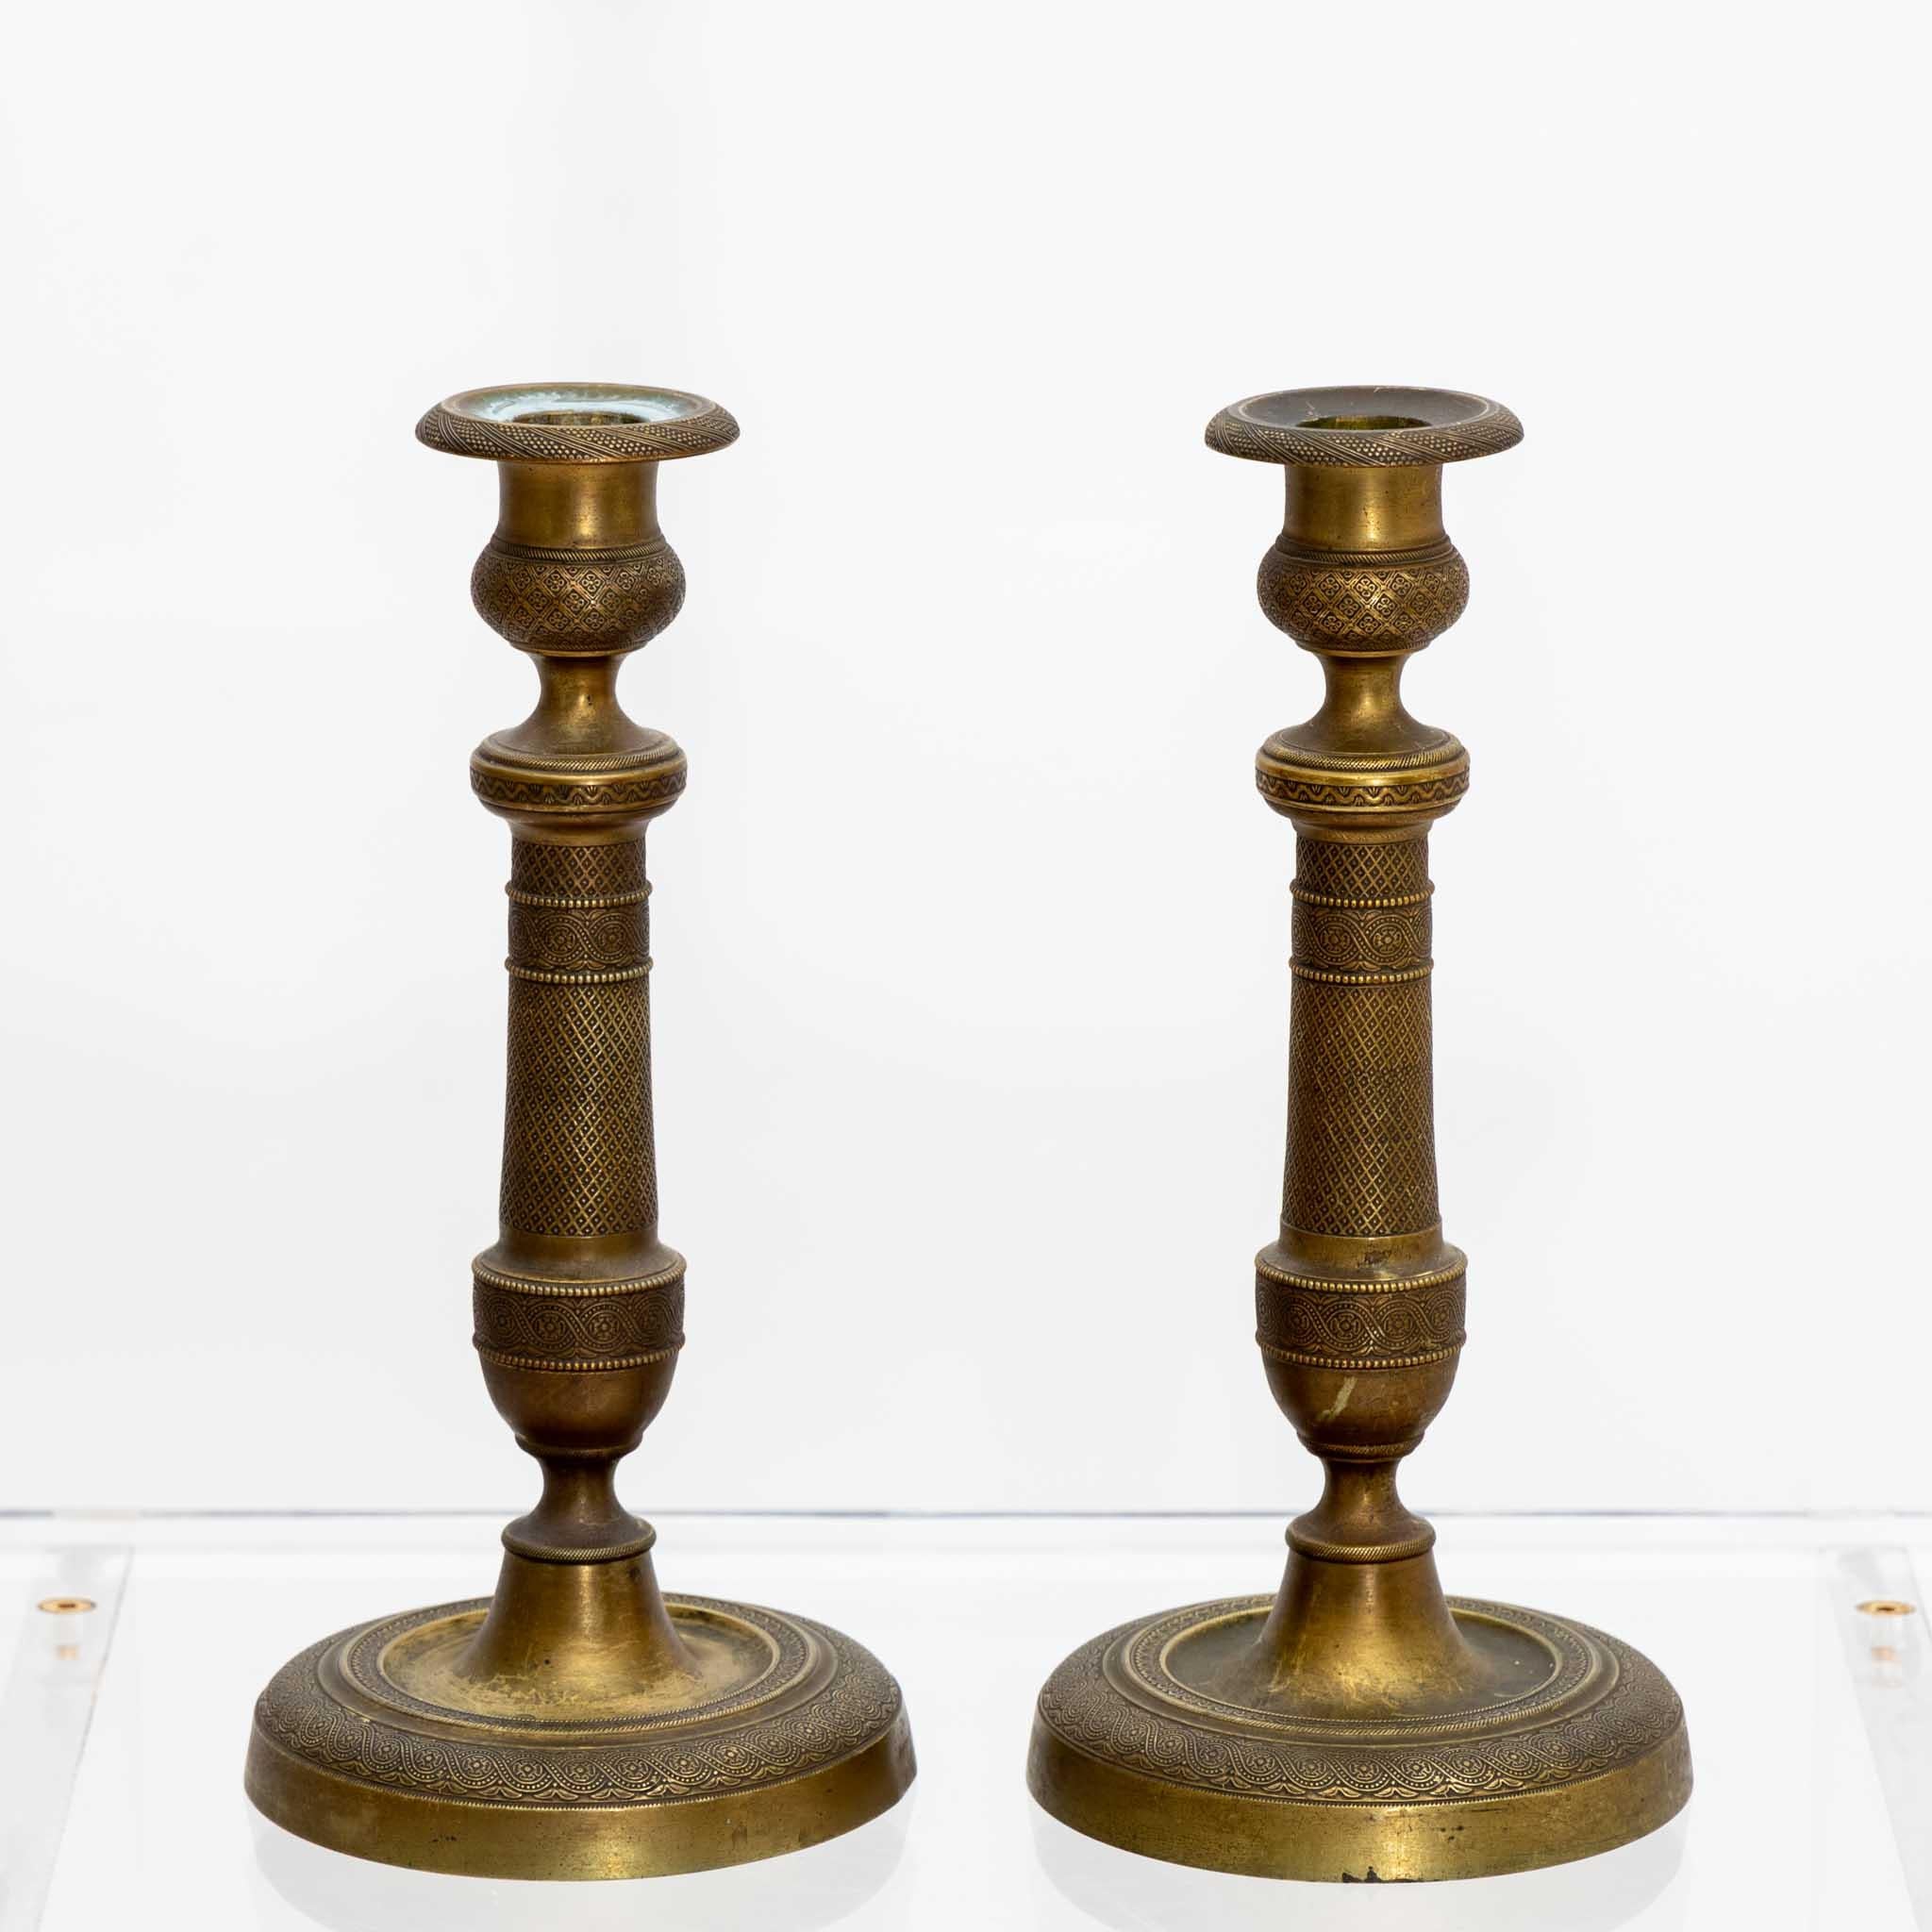 Pair of brass candlesticks with round base and baluster shaped stem.